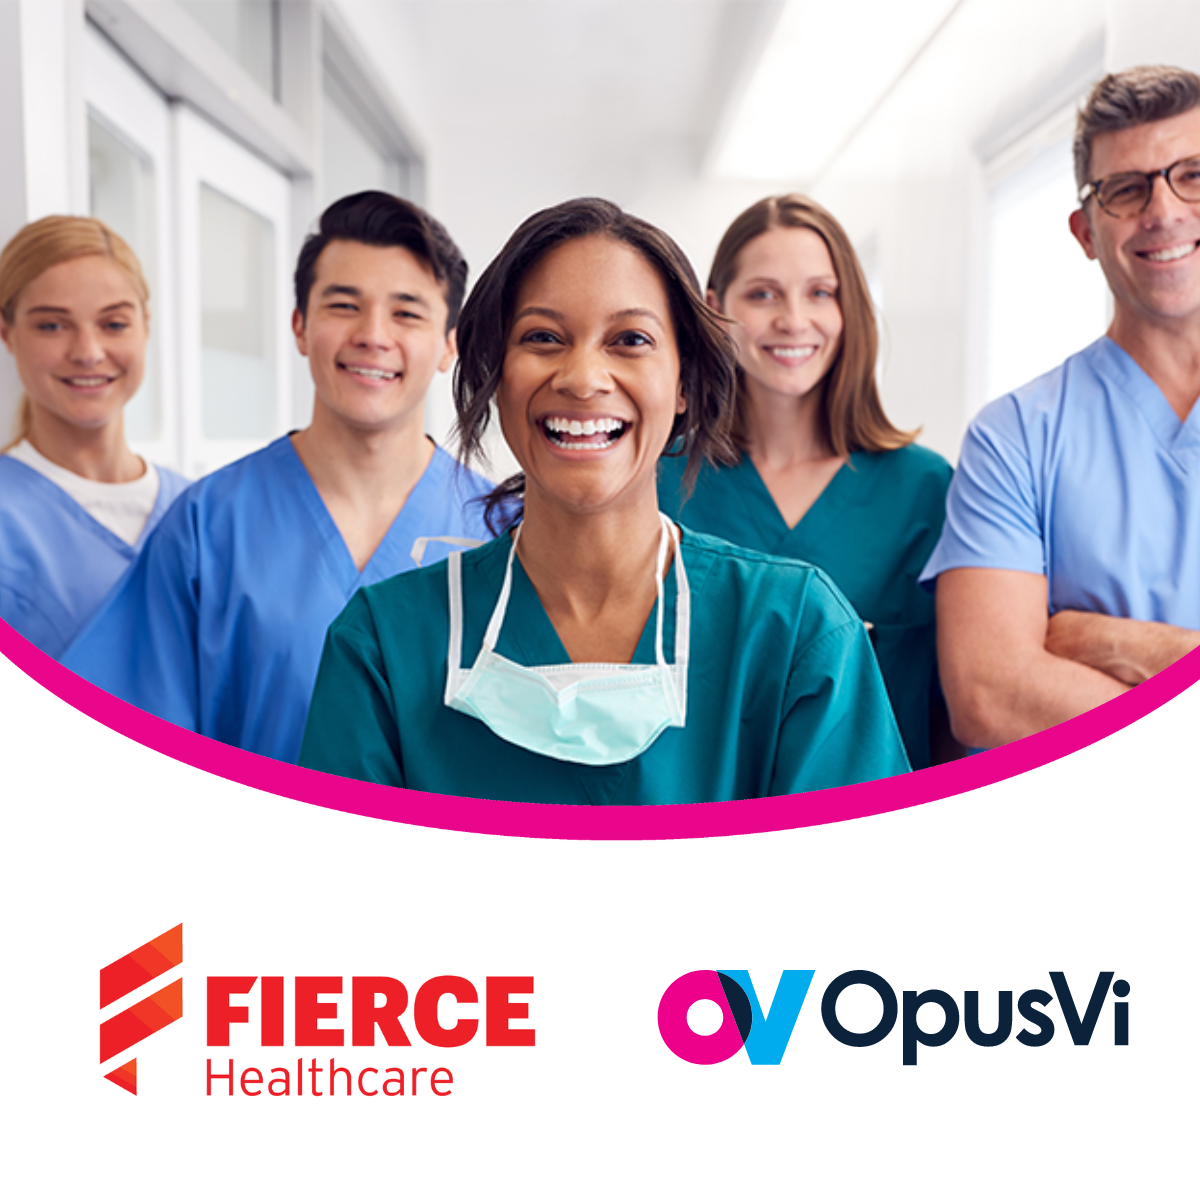 Fierce Healthcare Healthcares Fundamental Challenge - OpusVis Mission to Alleviate the Staffing Shortage